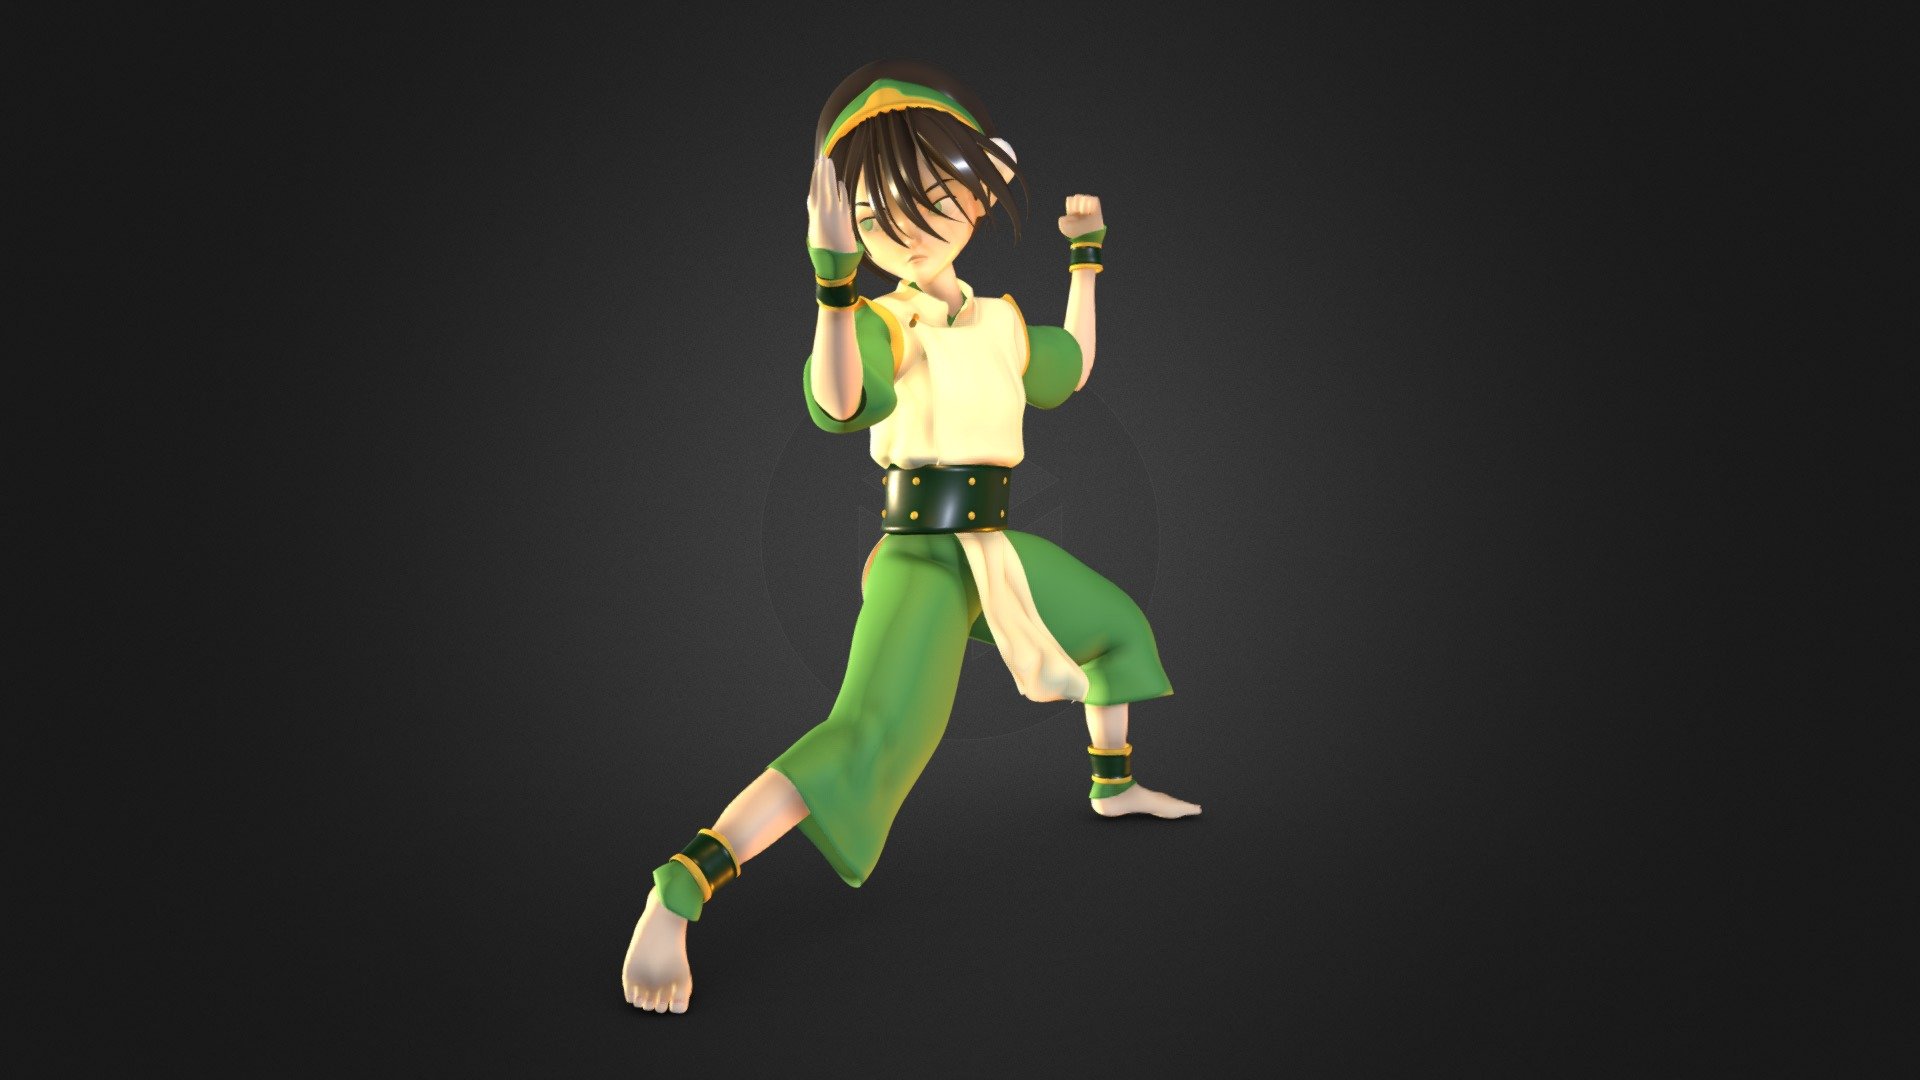 As it is one of my favourite shows and character, i made Toph Beifong in Blender.

The Additional file contains:
- Full .blend file, for Blender.
- Fbx file
-  Hand painted texture
- Character is already rigged, posed and does not include bones.

Let me know if you have any questions and I hope you like it 3d model